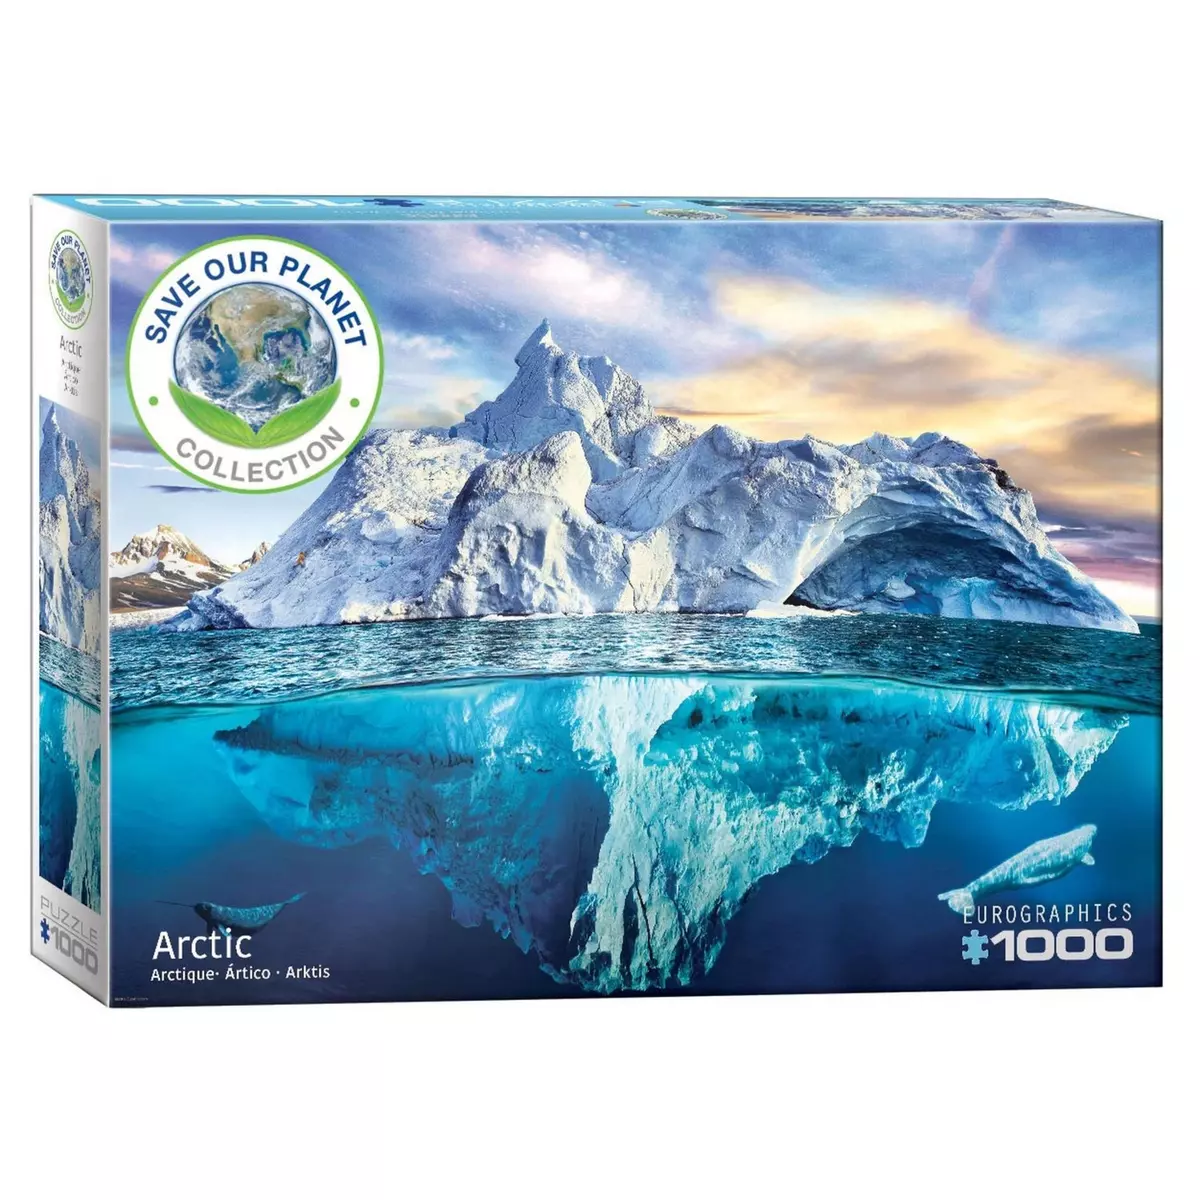 EUROGRAPHICS Puzzle Save The Planet Arctic